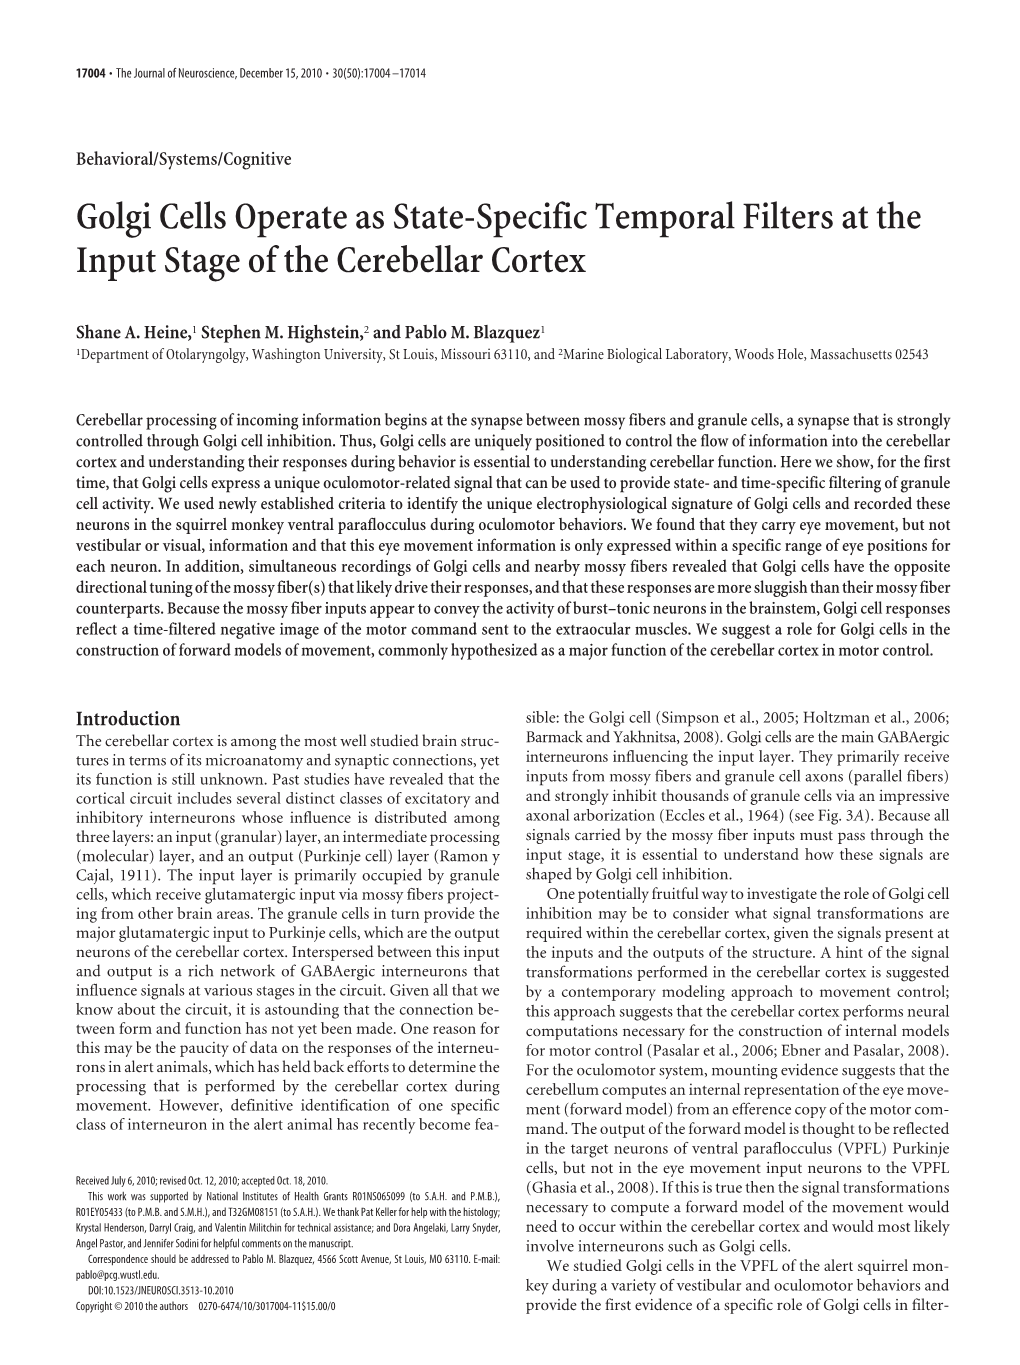 Golgi Cells Operate As State-Specific Temporal Filters at the Input Stage of the Cerebellar Cortex